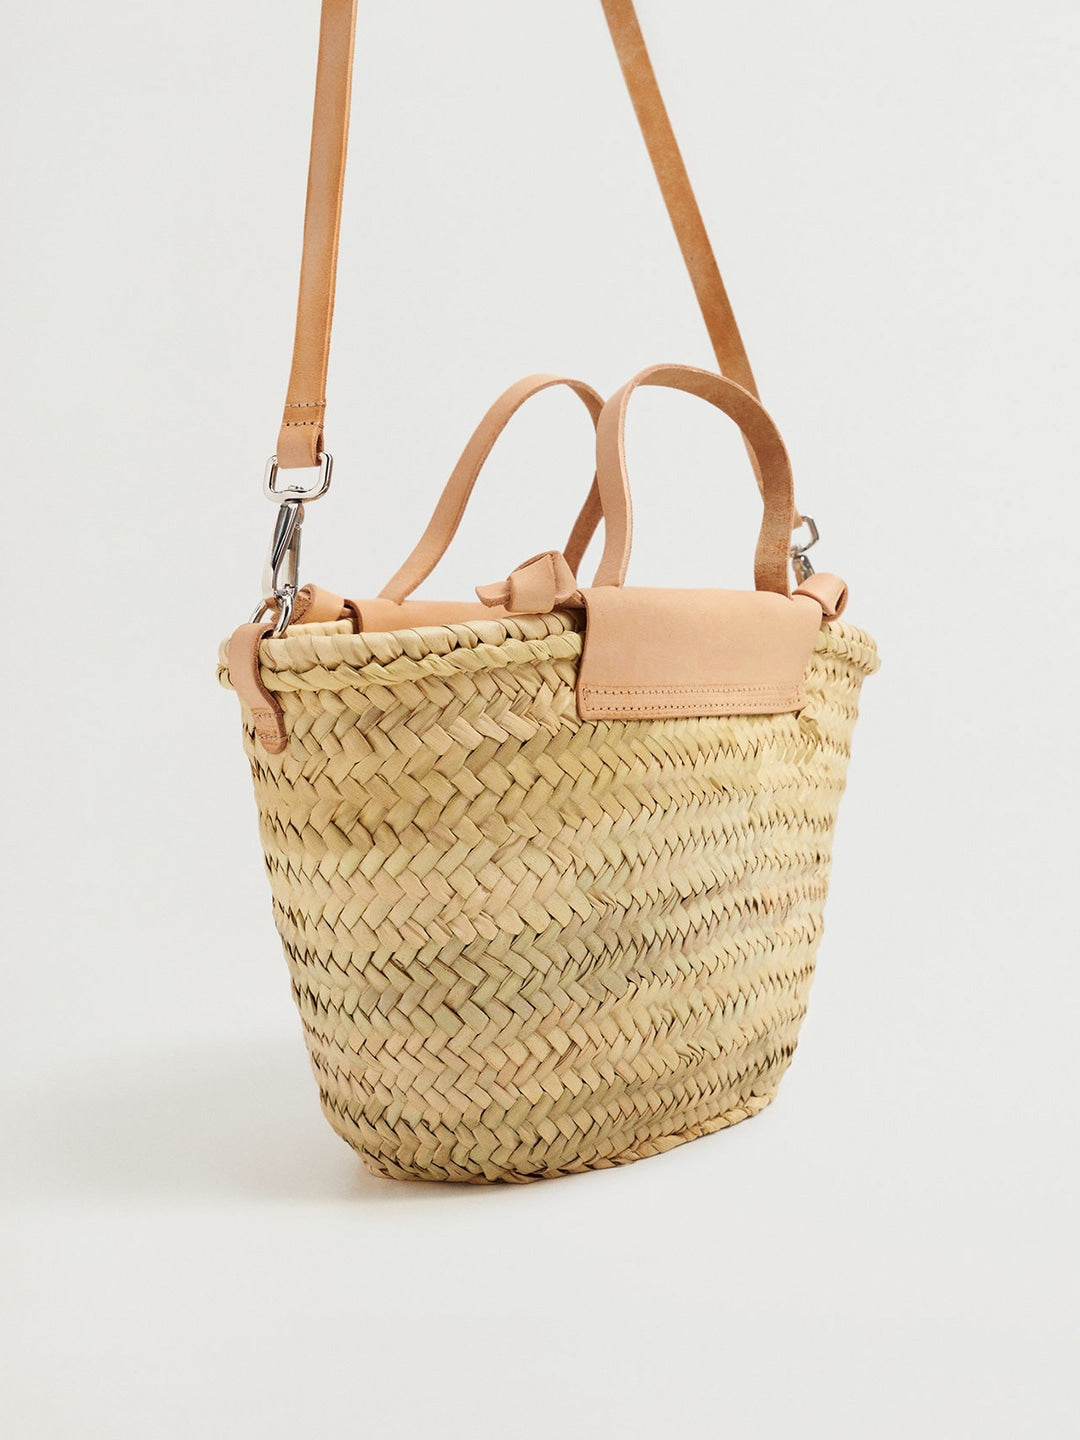 22682fc9-d80a-48ec-9840-71f80fc9ab151631524756039-MANGO-Beige-Basket-Weave-Textured-Handcrafted-Sustainable-Ha-3 Beige